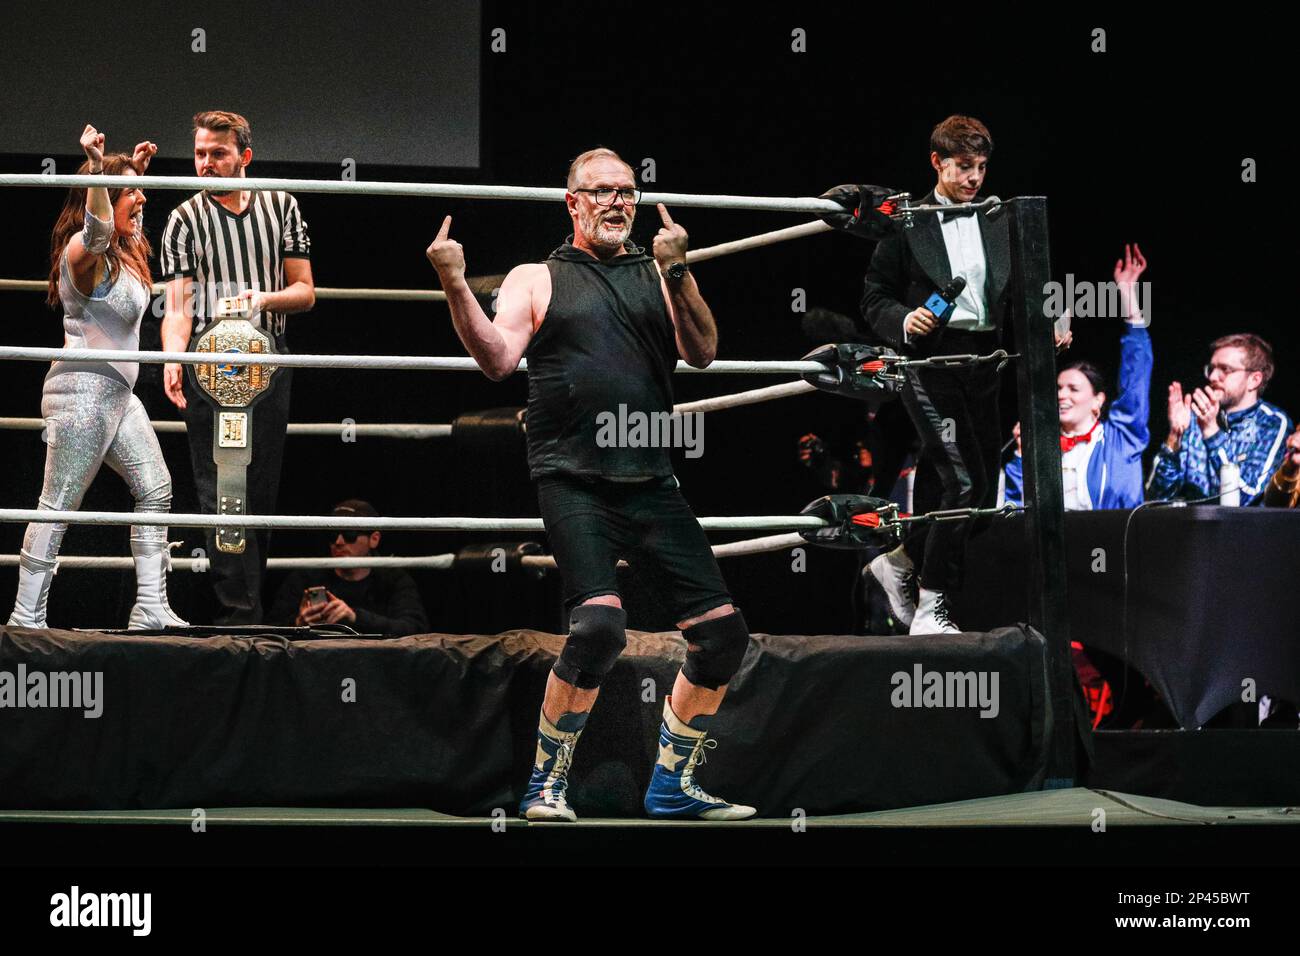 London, UK, 05th Mar 2023.Greg Davies challenges Rosie Jones to a fight and gives the middle finger to the rules. 'Max and Ivan's 'The Wrestling' ' sees well known comedians transform into wrestlers along real pros. Just For Laughs London, in its inaugural year, runs in venues at the O2 from Mar 2-5, 2023. Participating comedians and pros in the ring are: Rachel Parris, Jazz Emu, Flo & Joan, Nick Helm, Suzi Ruffell, Aisling Bea, Iain Stirling, Nish Kumar, Matthew Crosby, Olga Koch, Rosie Jones, Greg Davies, Rishi Ghosh, Mark Silcox, Ray Badran, Siblings, Nina Samuels, Sarah Keyworth, Rachel W Stock Photo